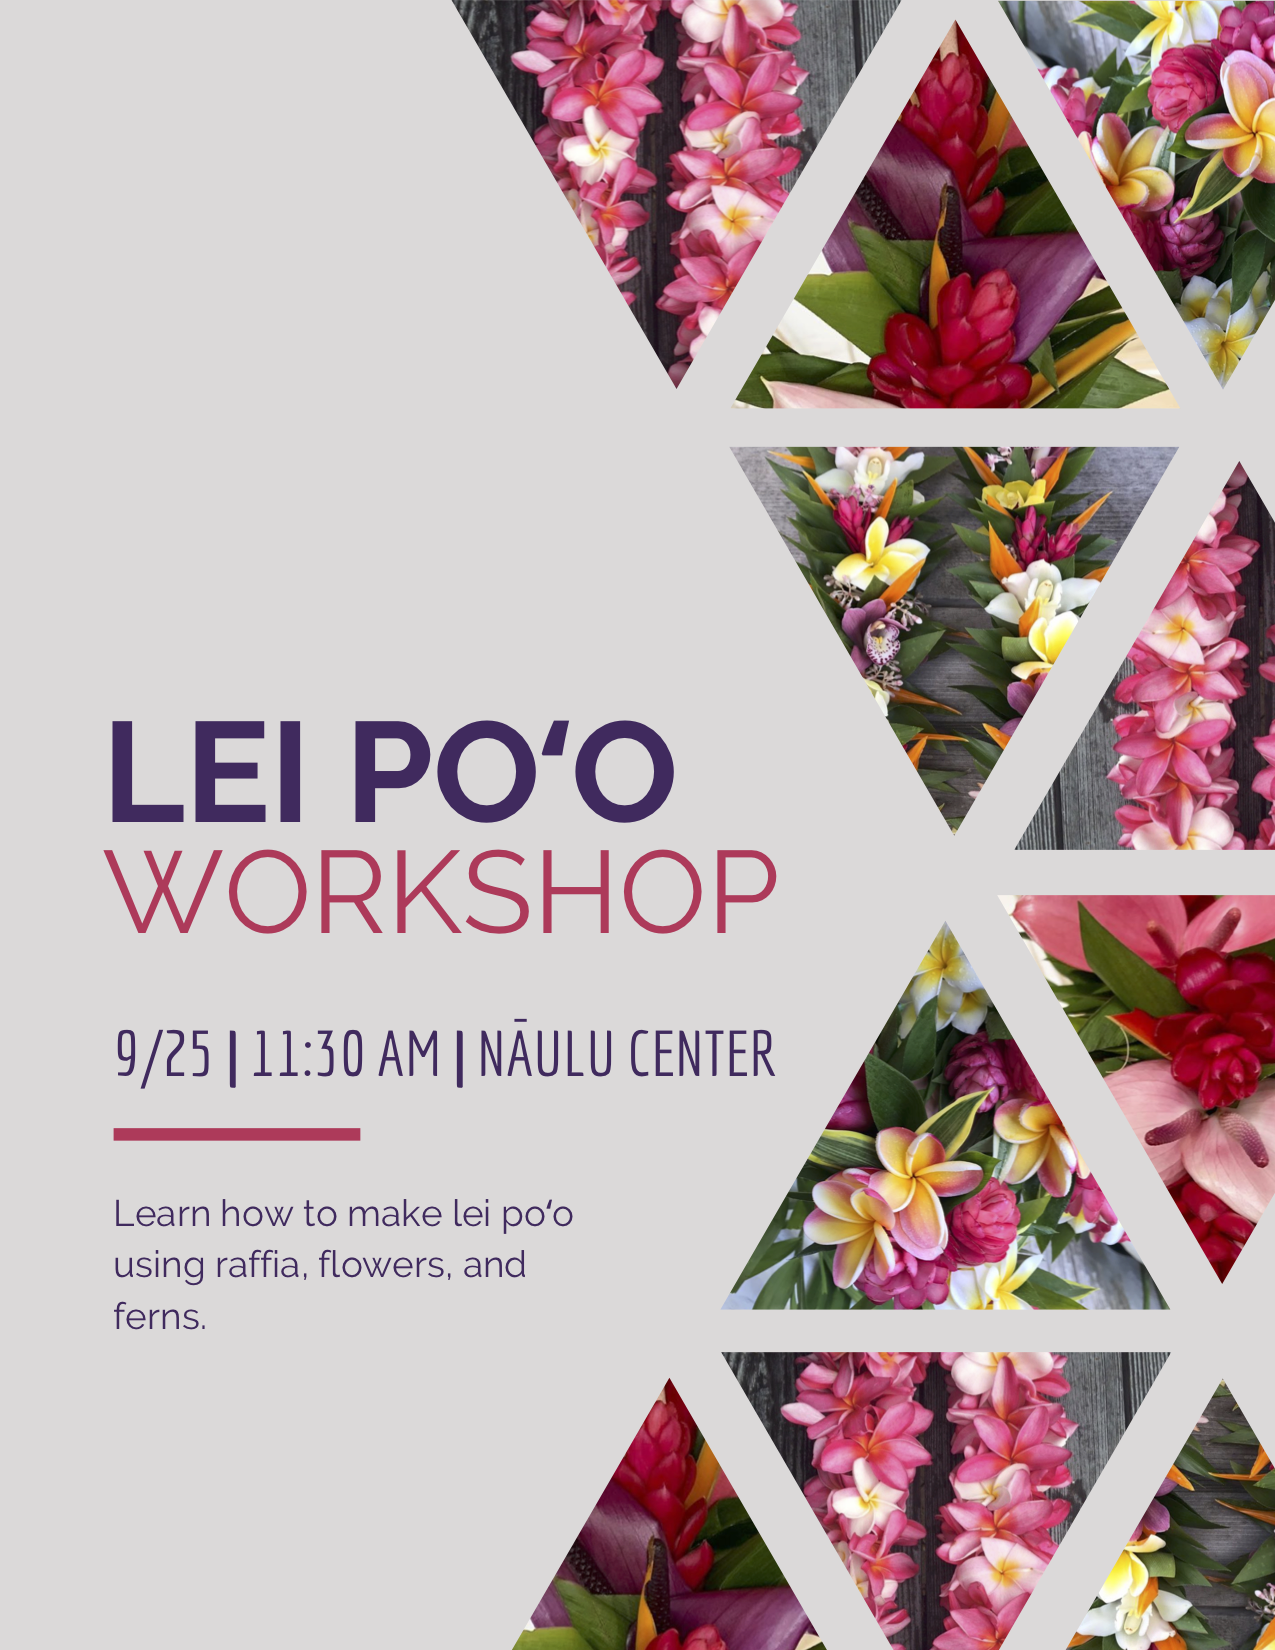 Learn to make a lei poo on September 25 at 11:30 a.m. in the Naulu Center